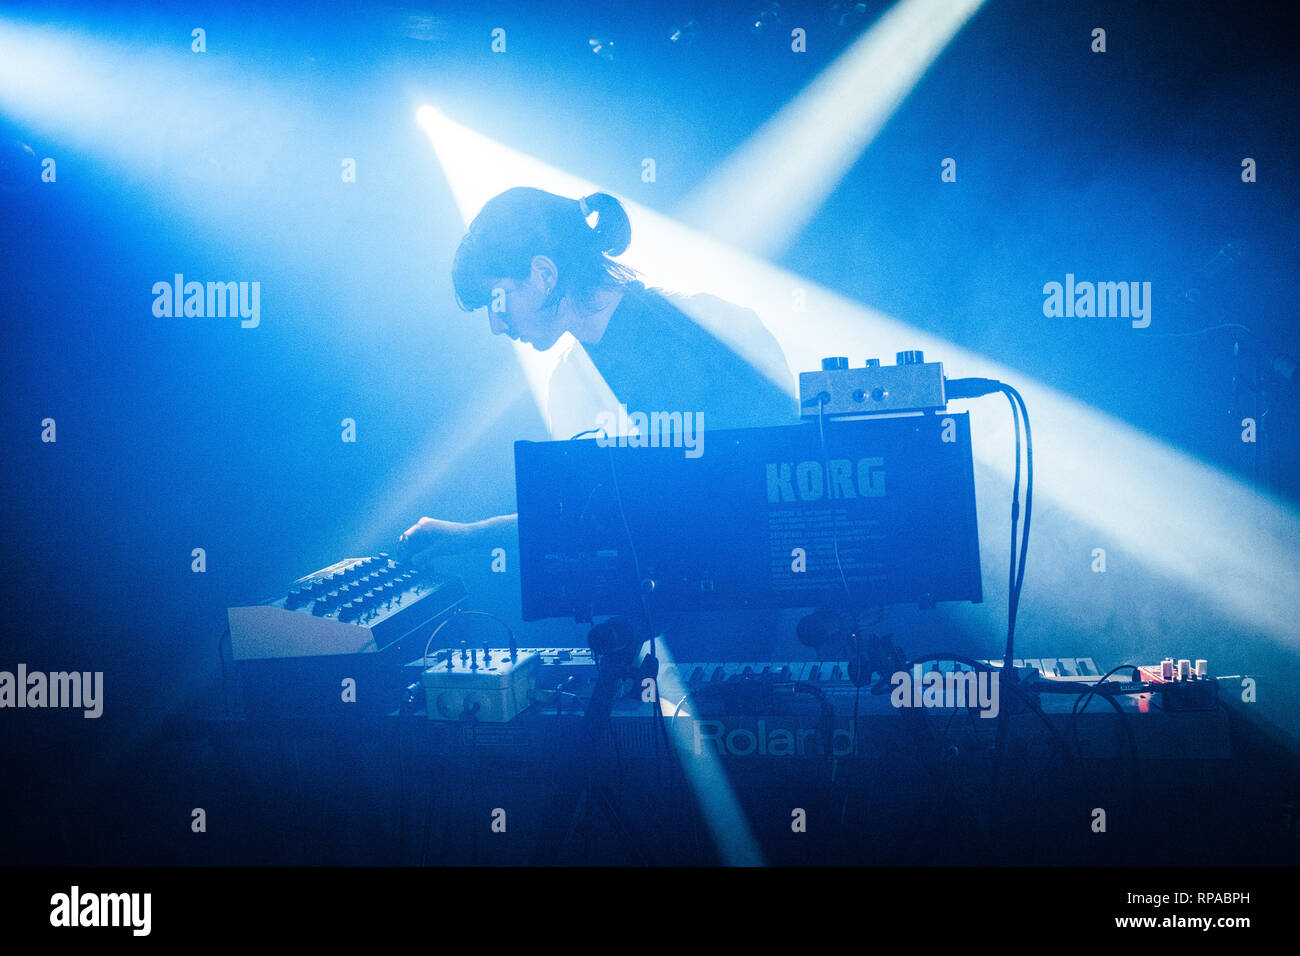 Denmark, Copenhagen - February 20, 2019. The French electro-pop duo Agar  Agar performs a live concert at Loppen in Copenhagen. Here musician Armand  Bultheel is seen live on stage. (Photo credit: Gonzales